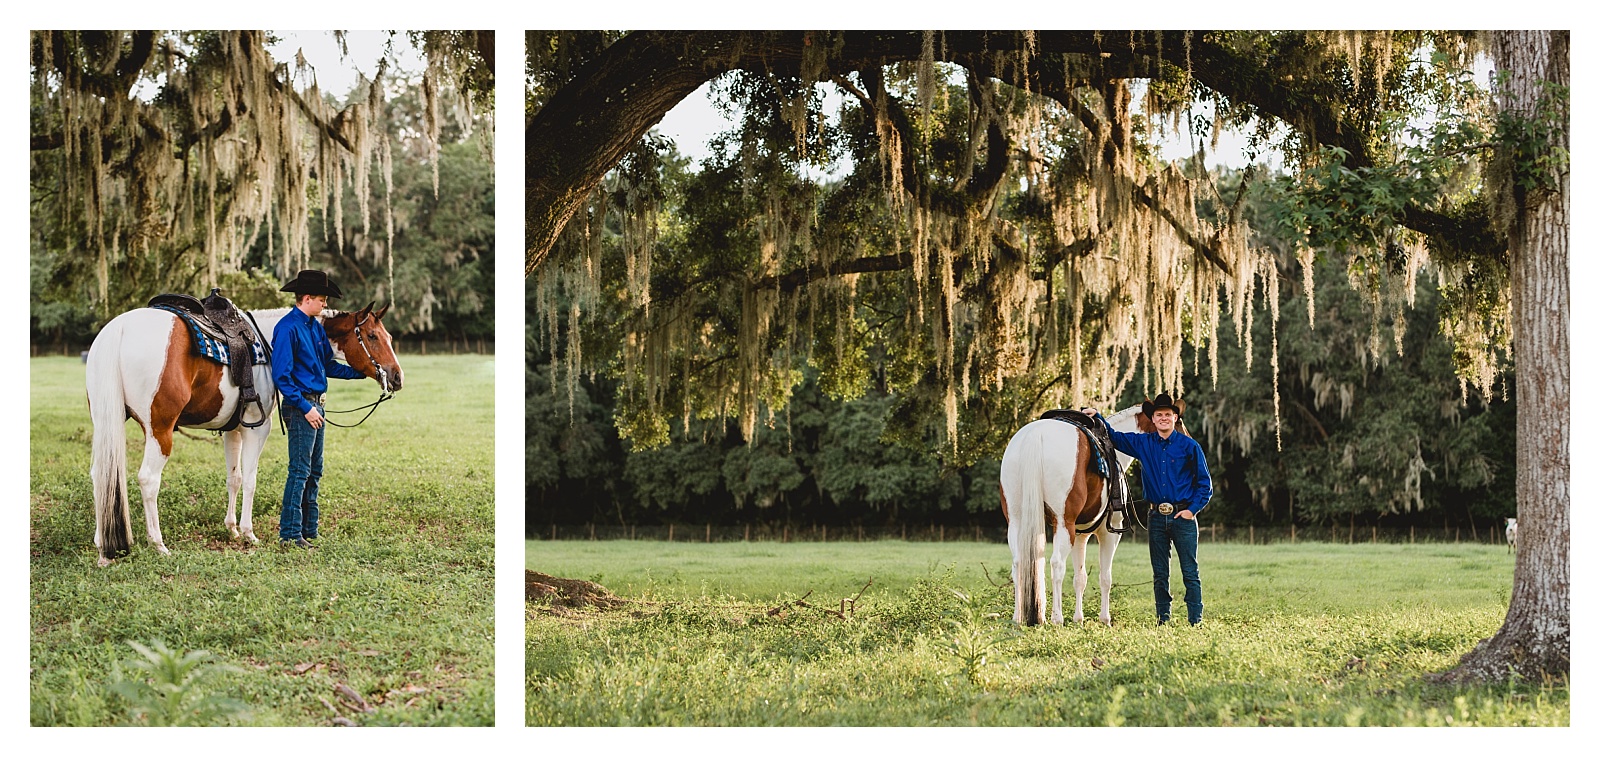 Horse and rider portrait session with oak trees in Gainesville, Florida.